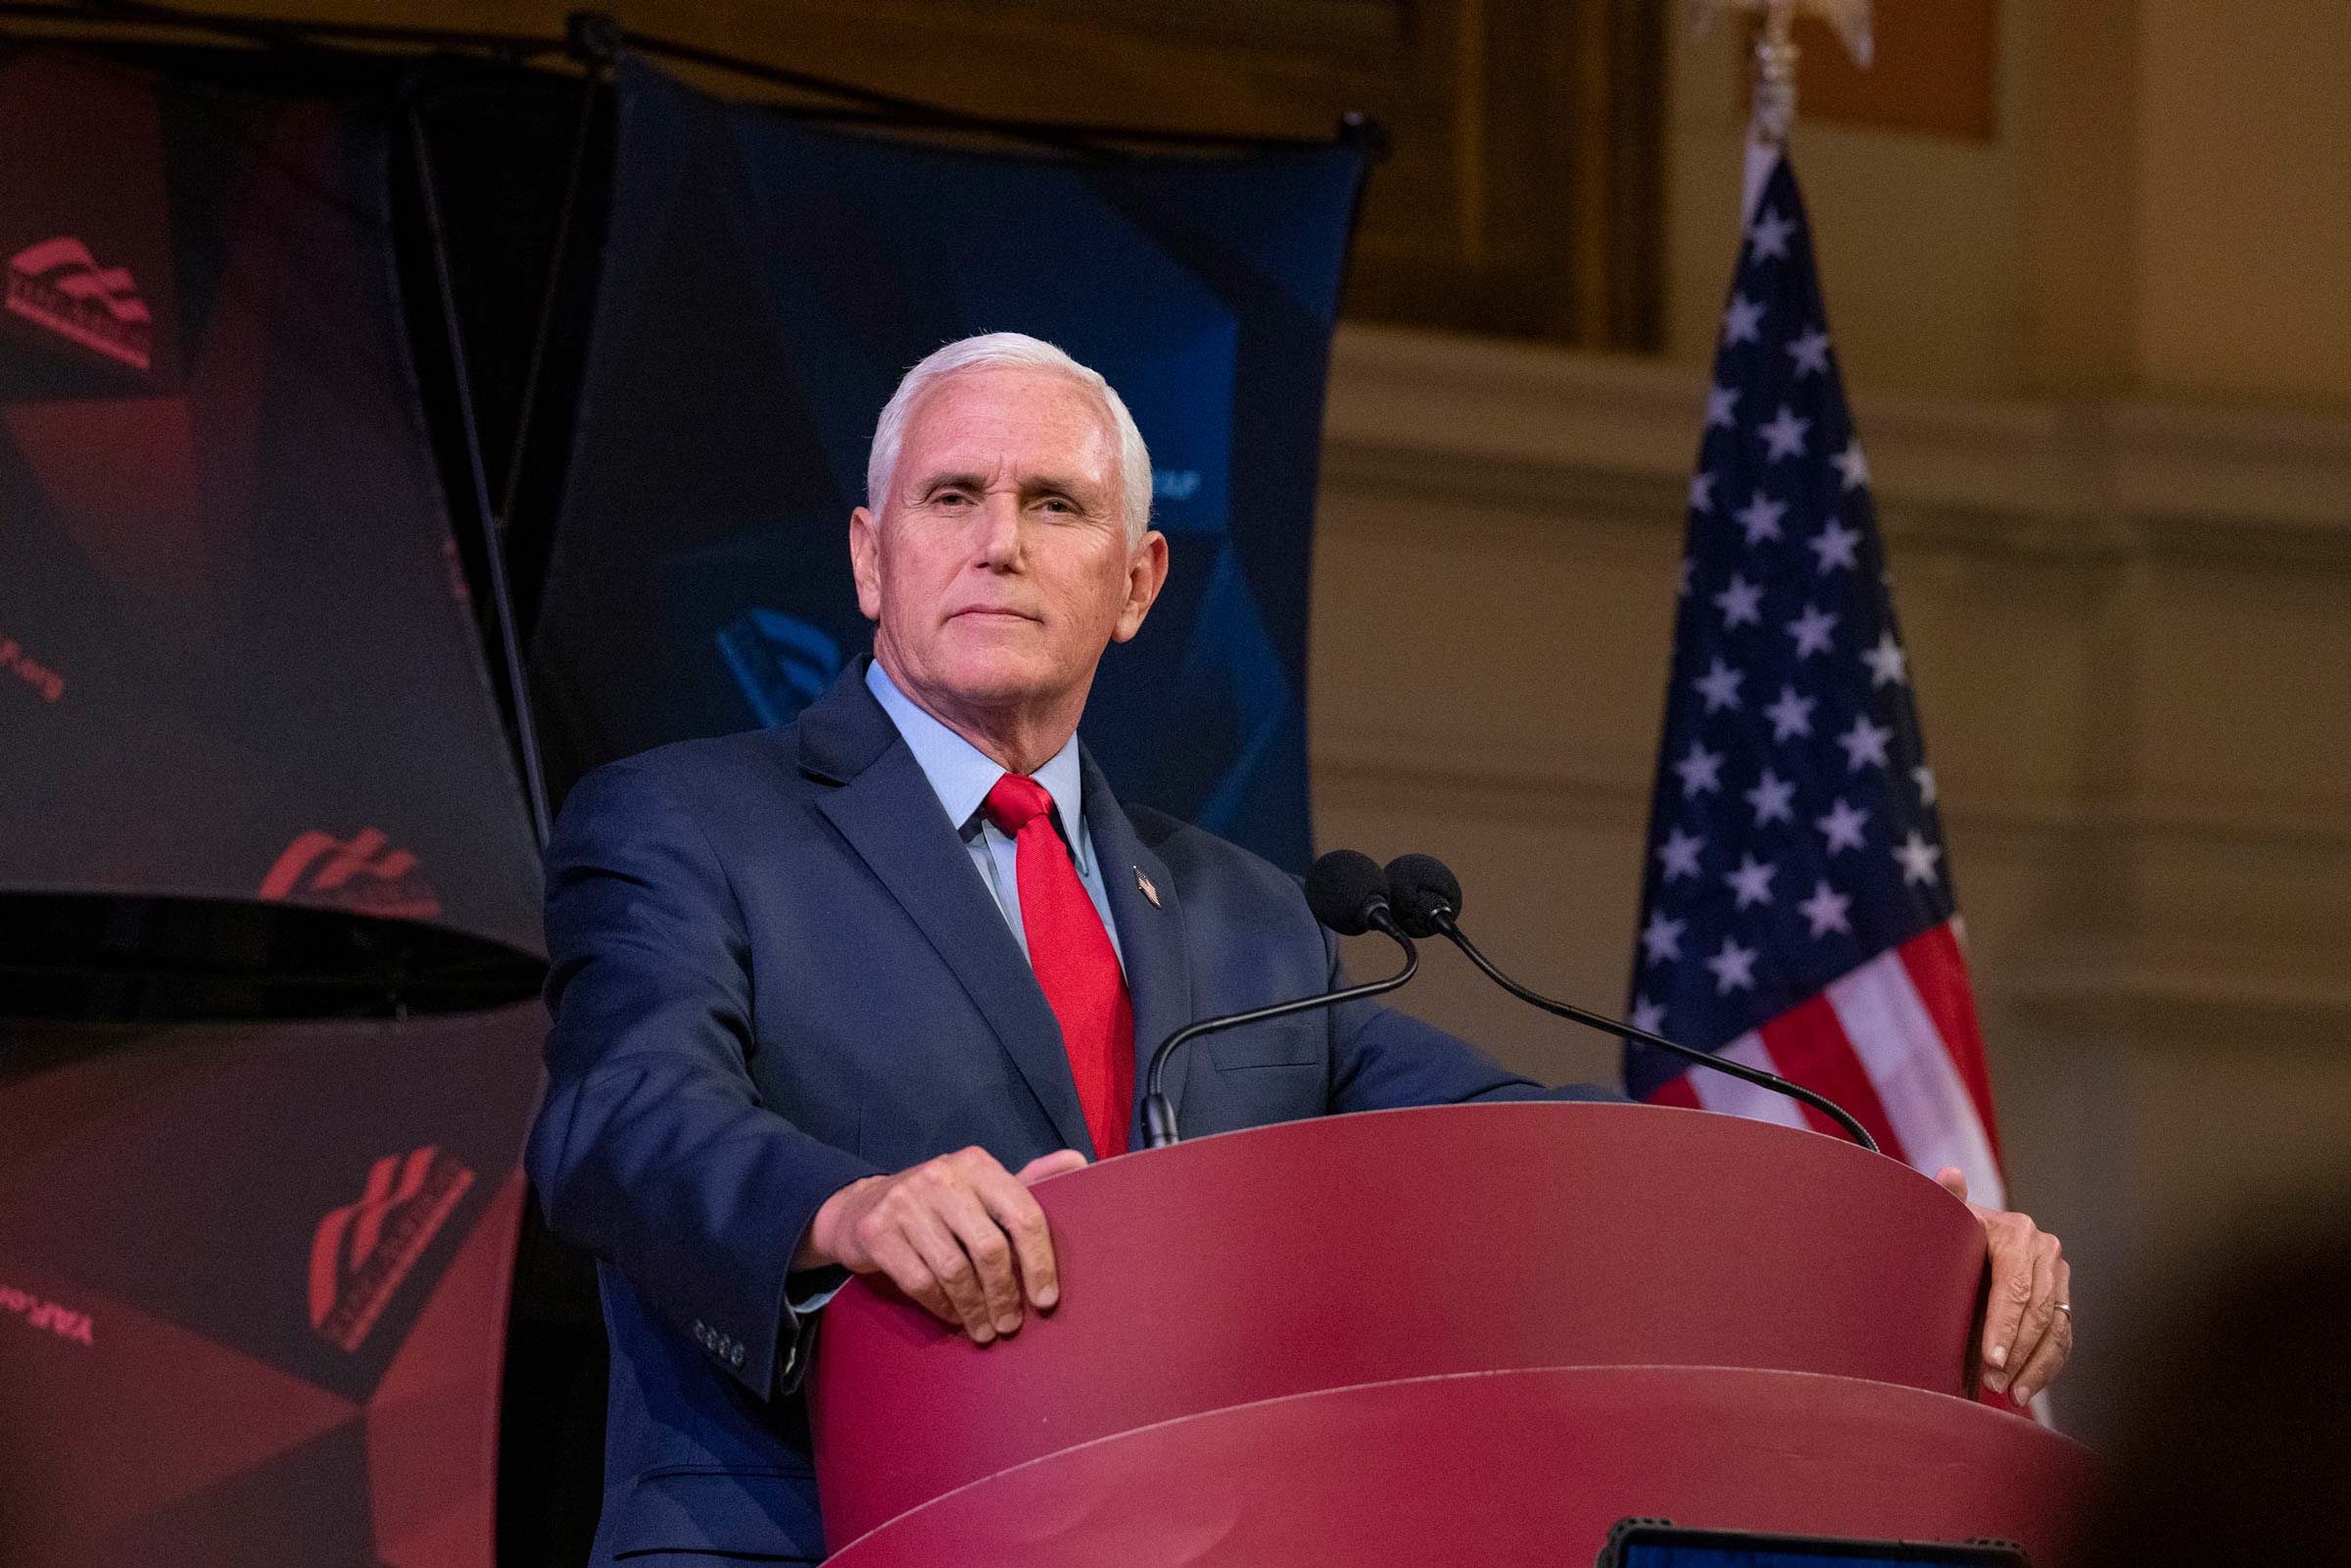 Mike Pence, wearing a blue suit and a red tie, stands at a podium, in front of an American flag.